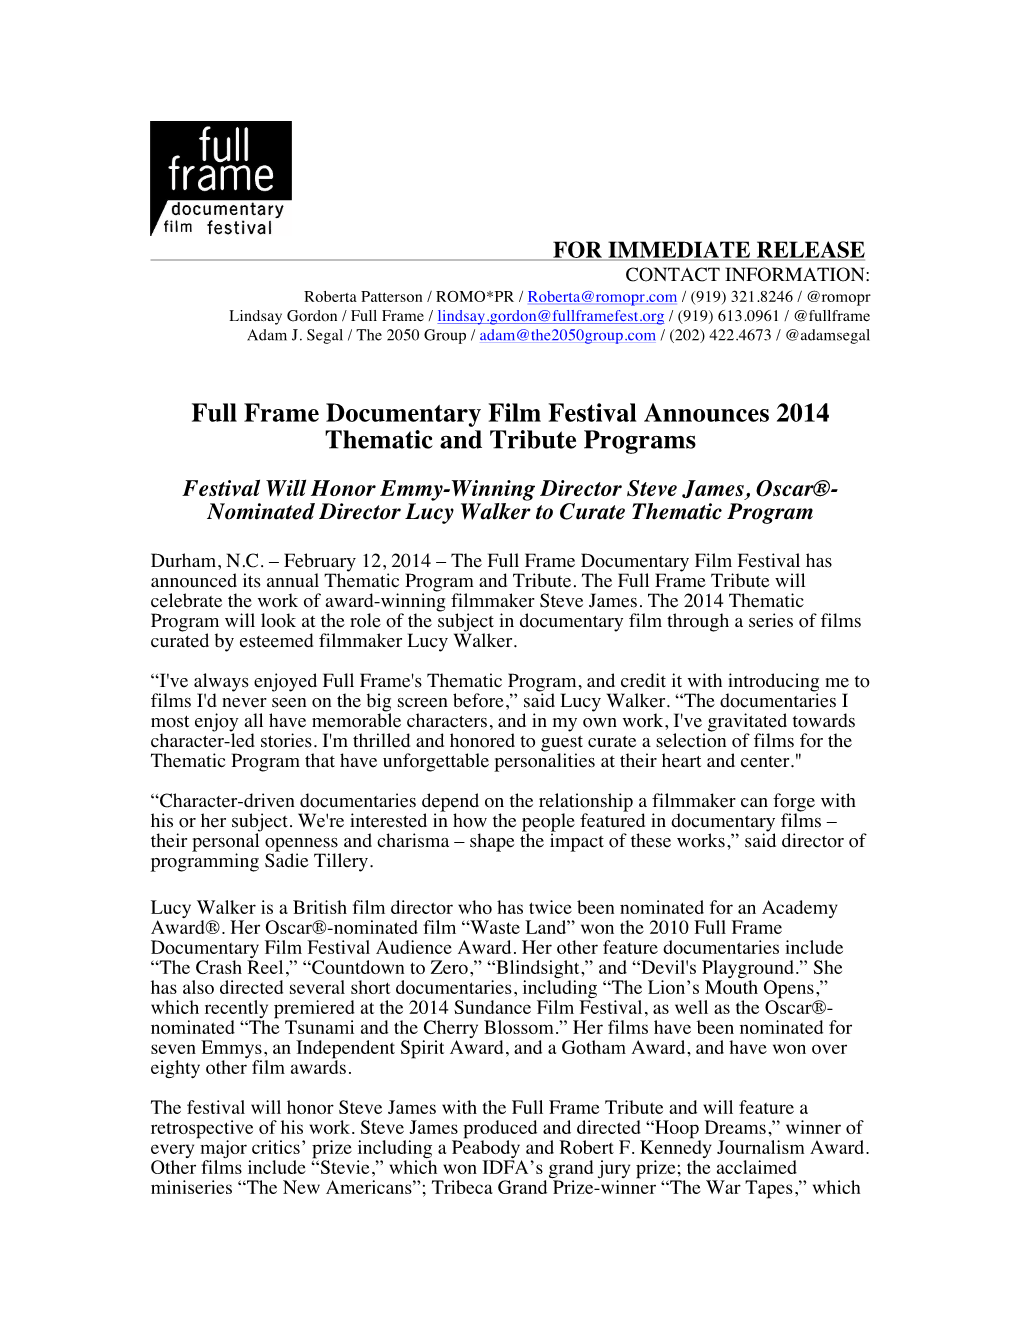 Full Frame Documentary Film Festival Announces 2014 Thematic and Tribute Programs